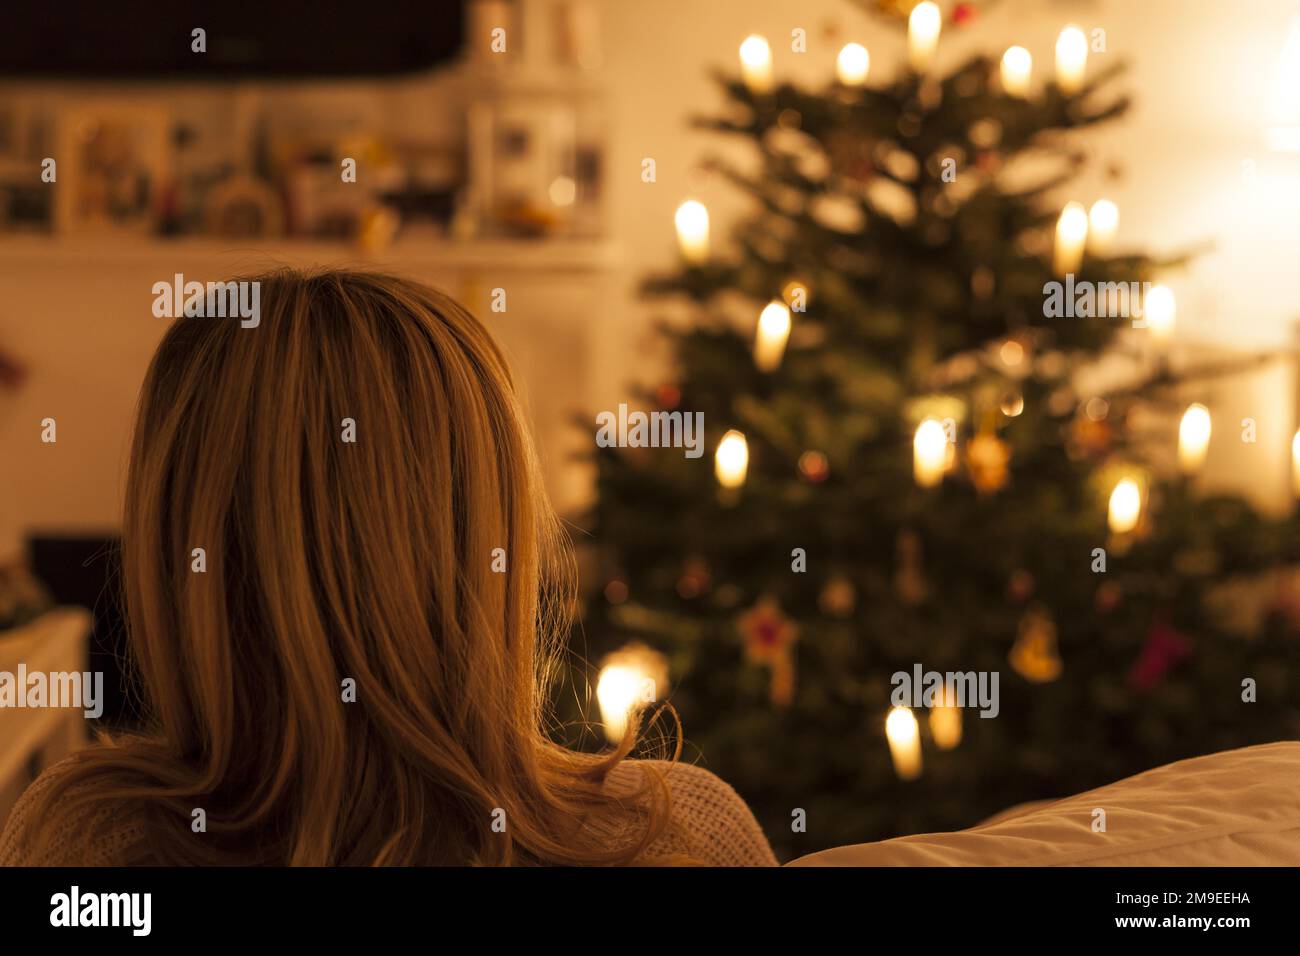 Woman sitting on sofa in front of Christmas tree, back view Stock Photo